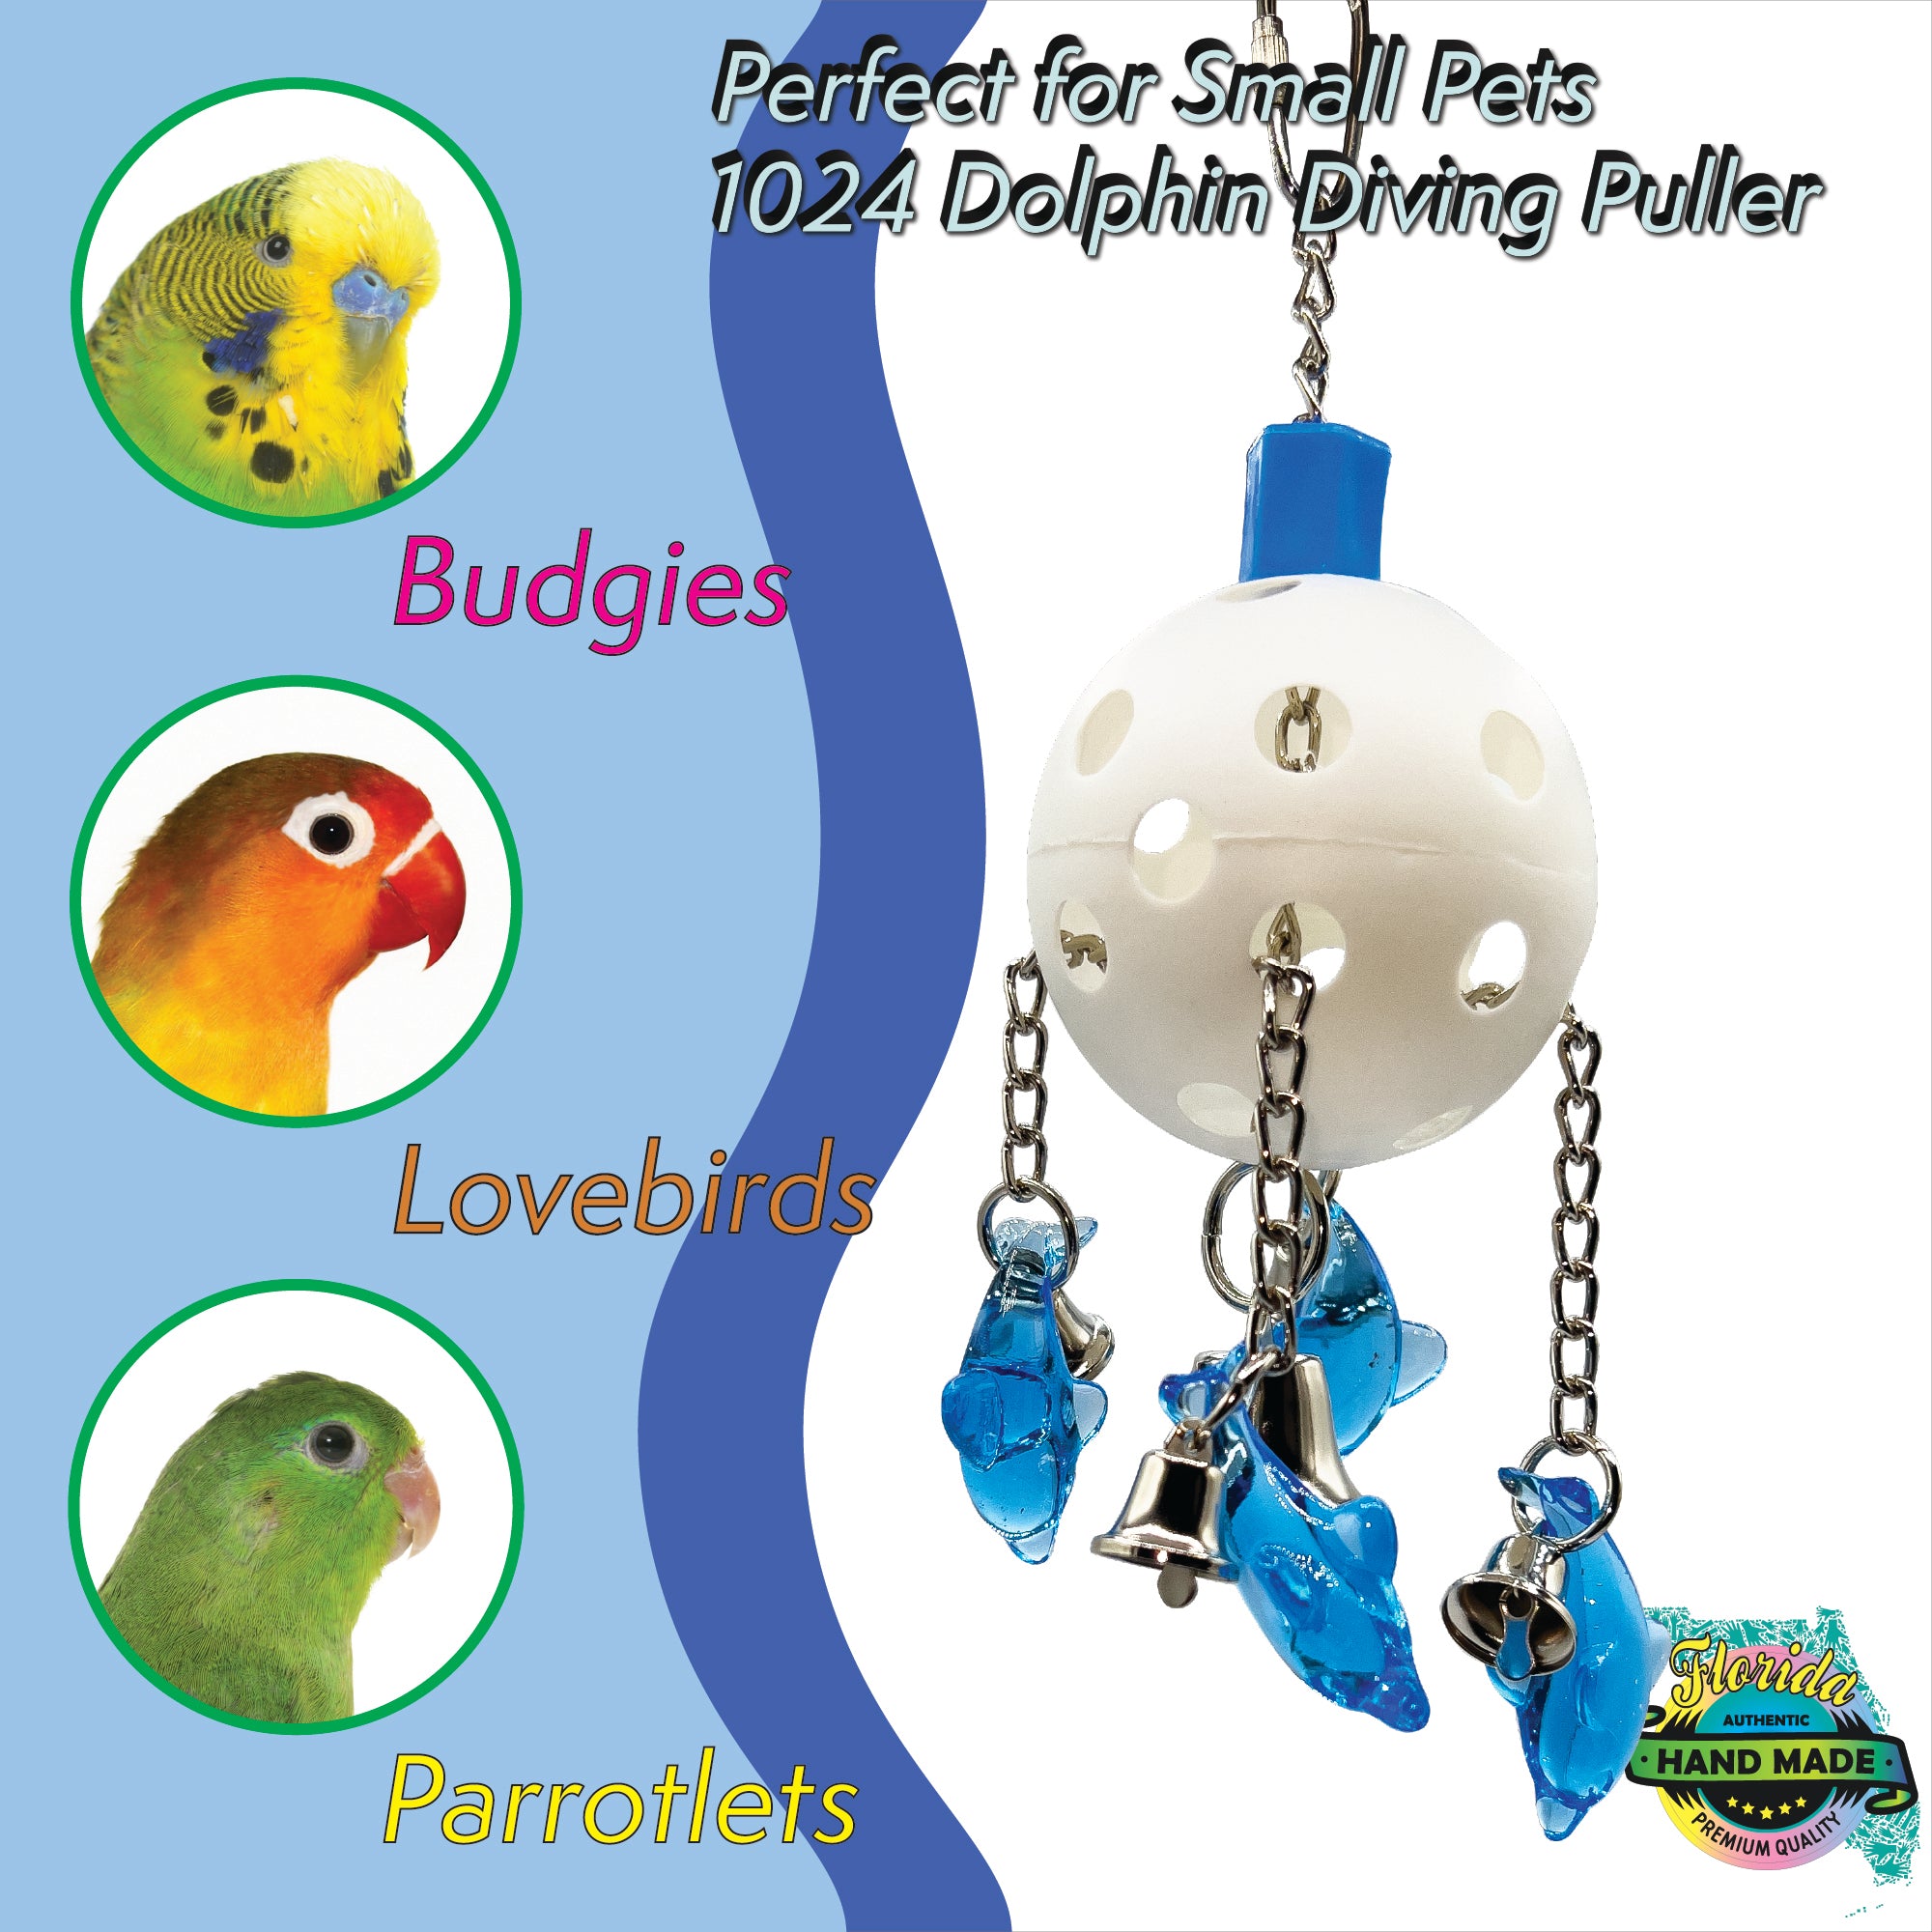 1024 Dolphin Diving Puller M&M Union Bird Toys